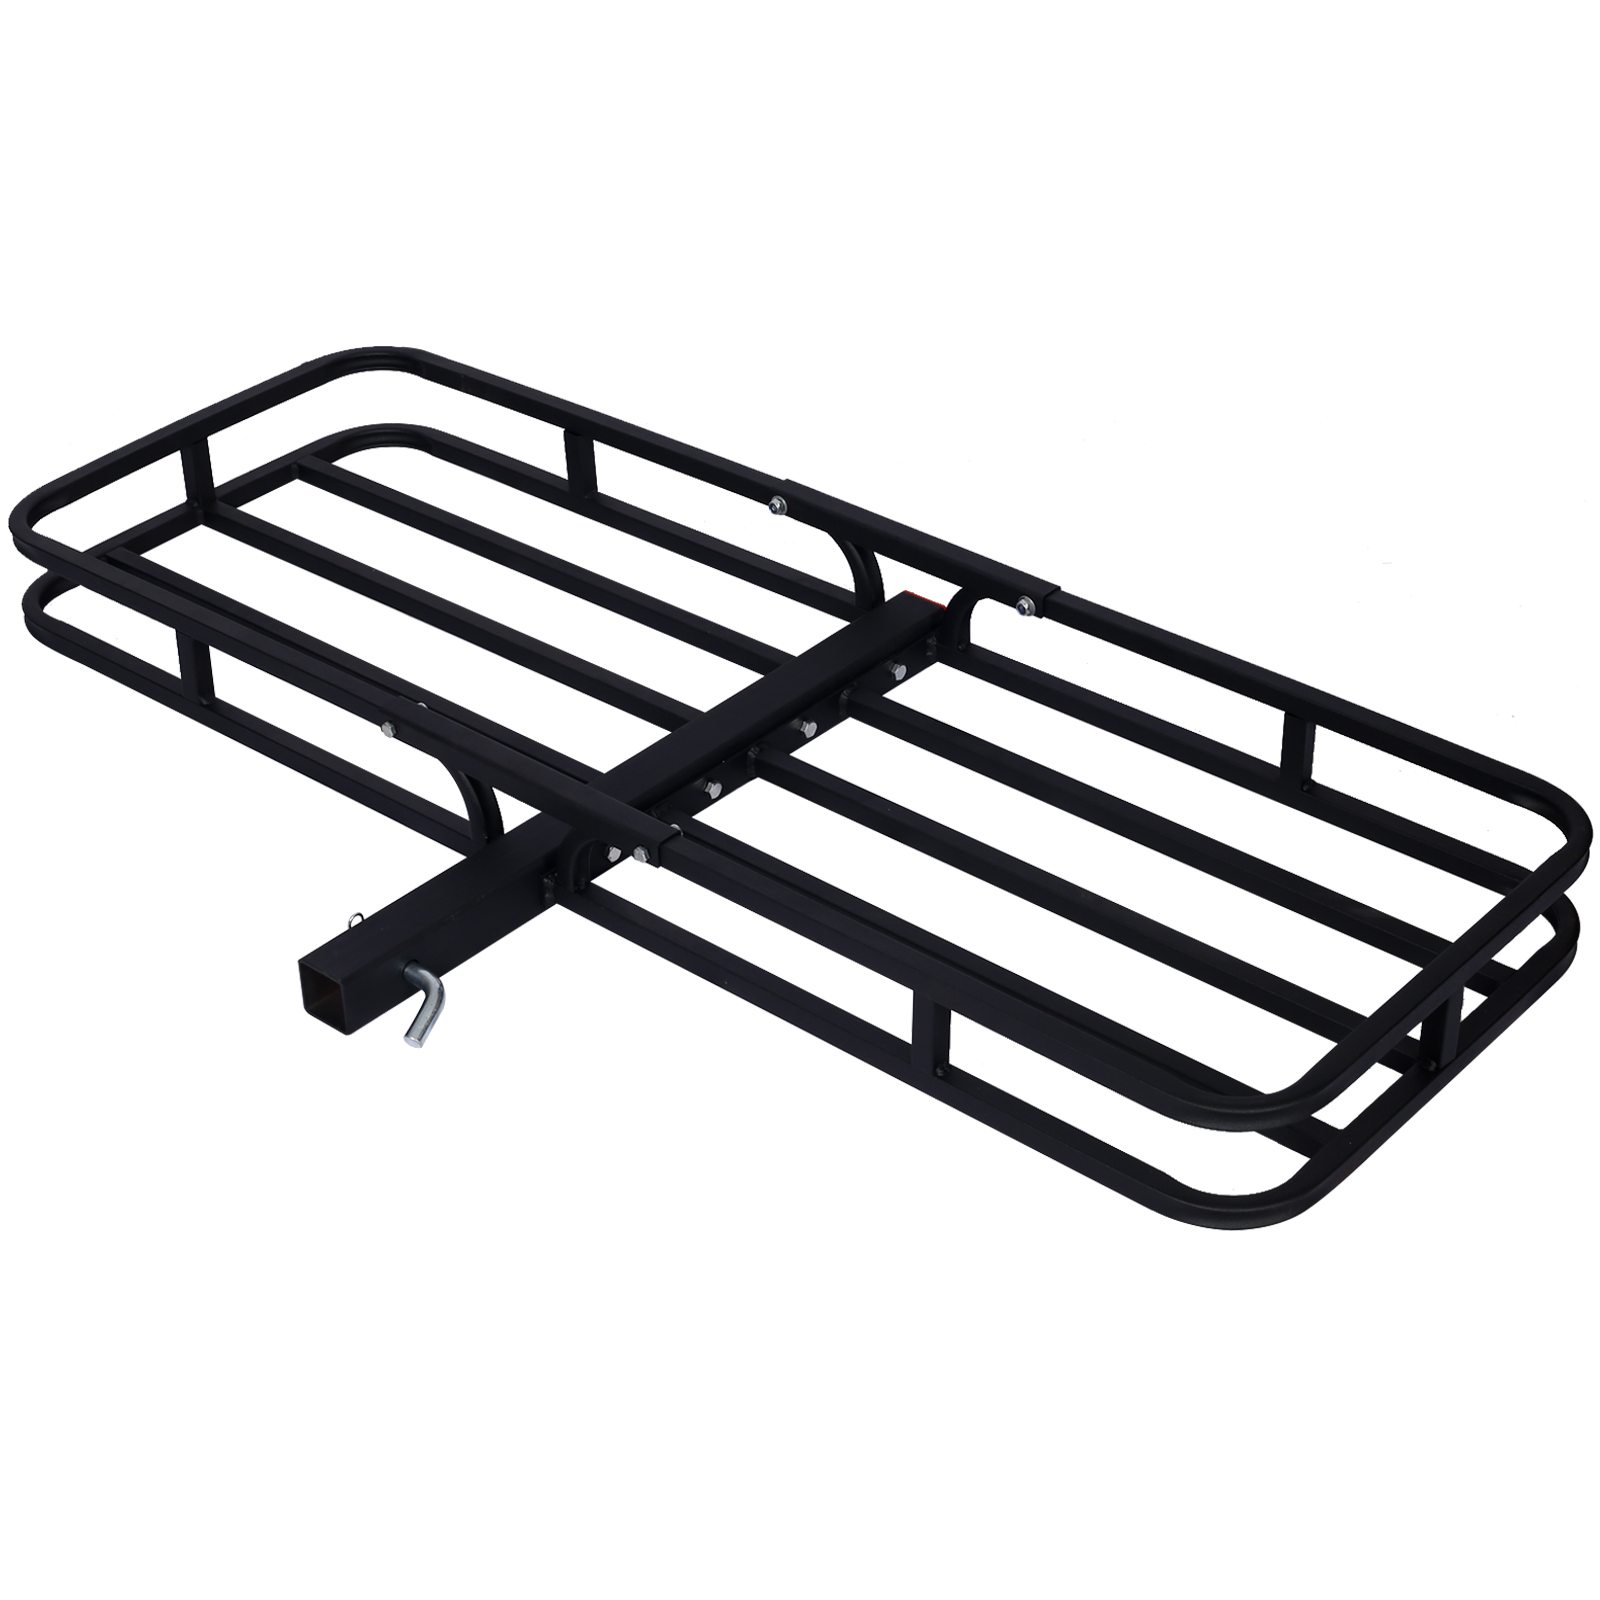 Hitch Mount Cargo Carrier ,Rear Cargo Rack for SUV, Truck, Car,Luggage Basket Rack Fits 2' Receiver-CASAINC